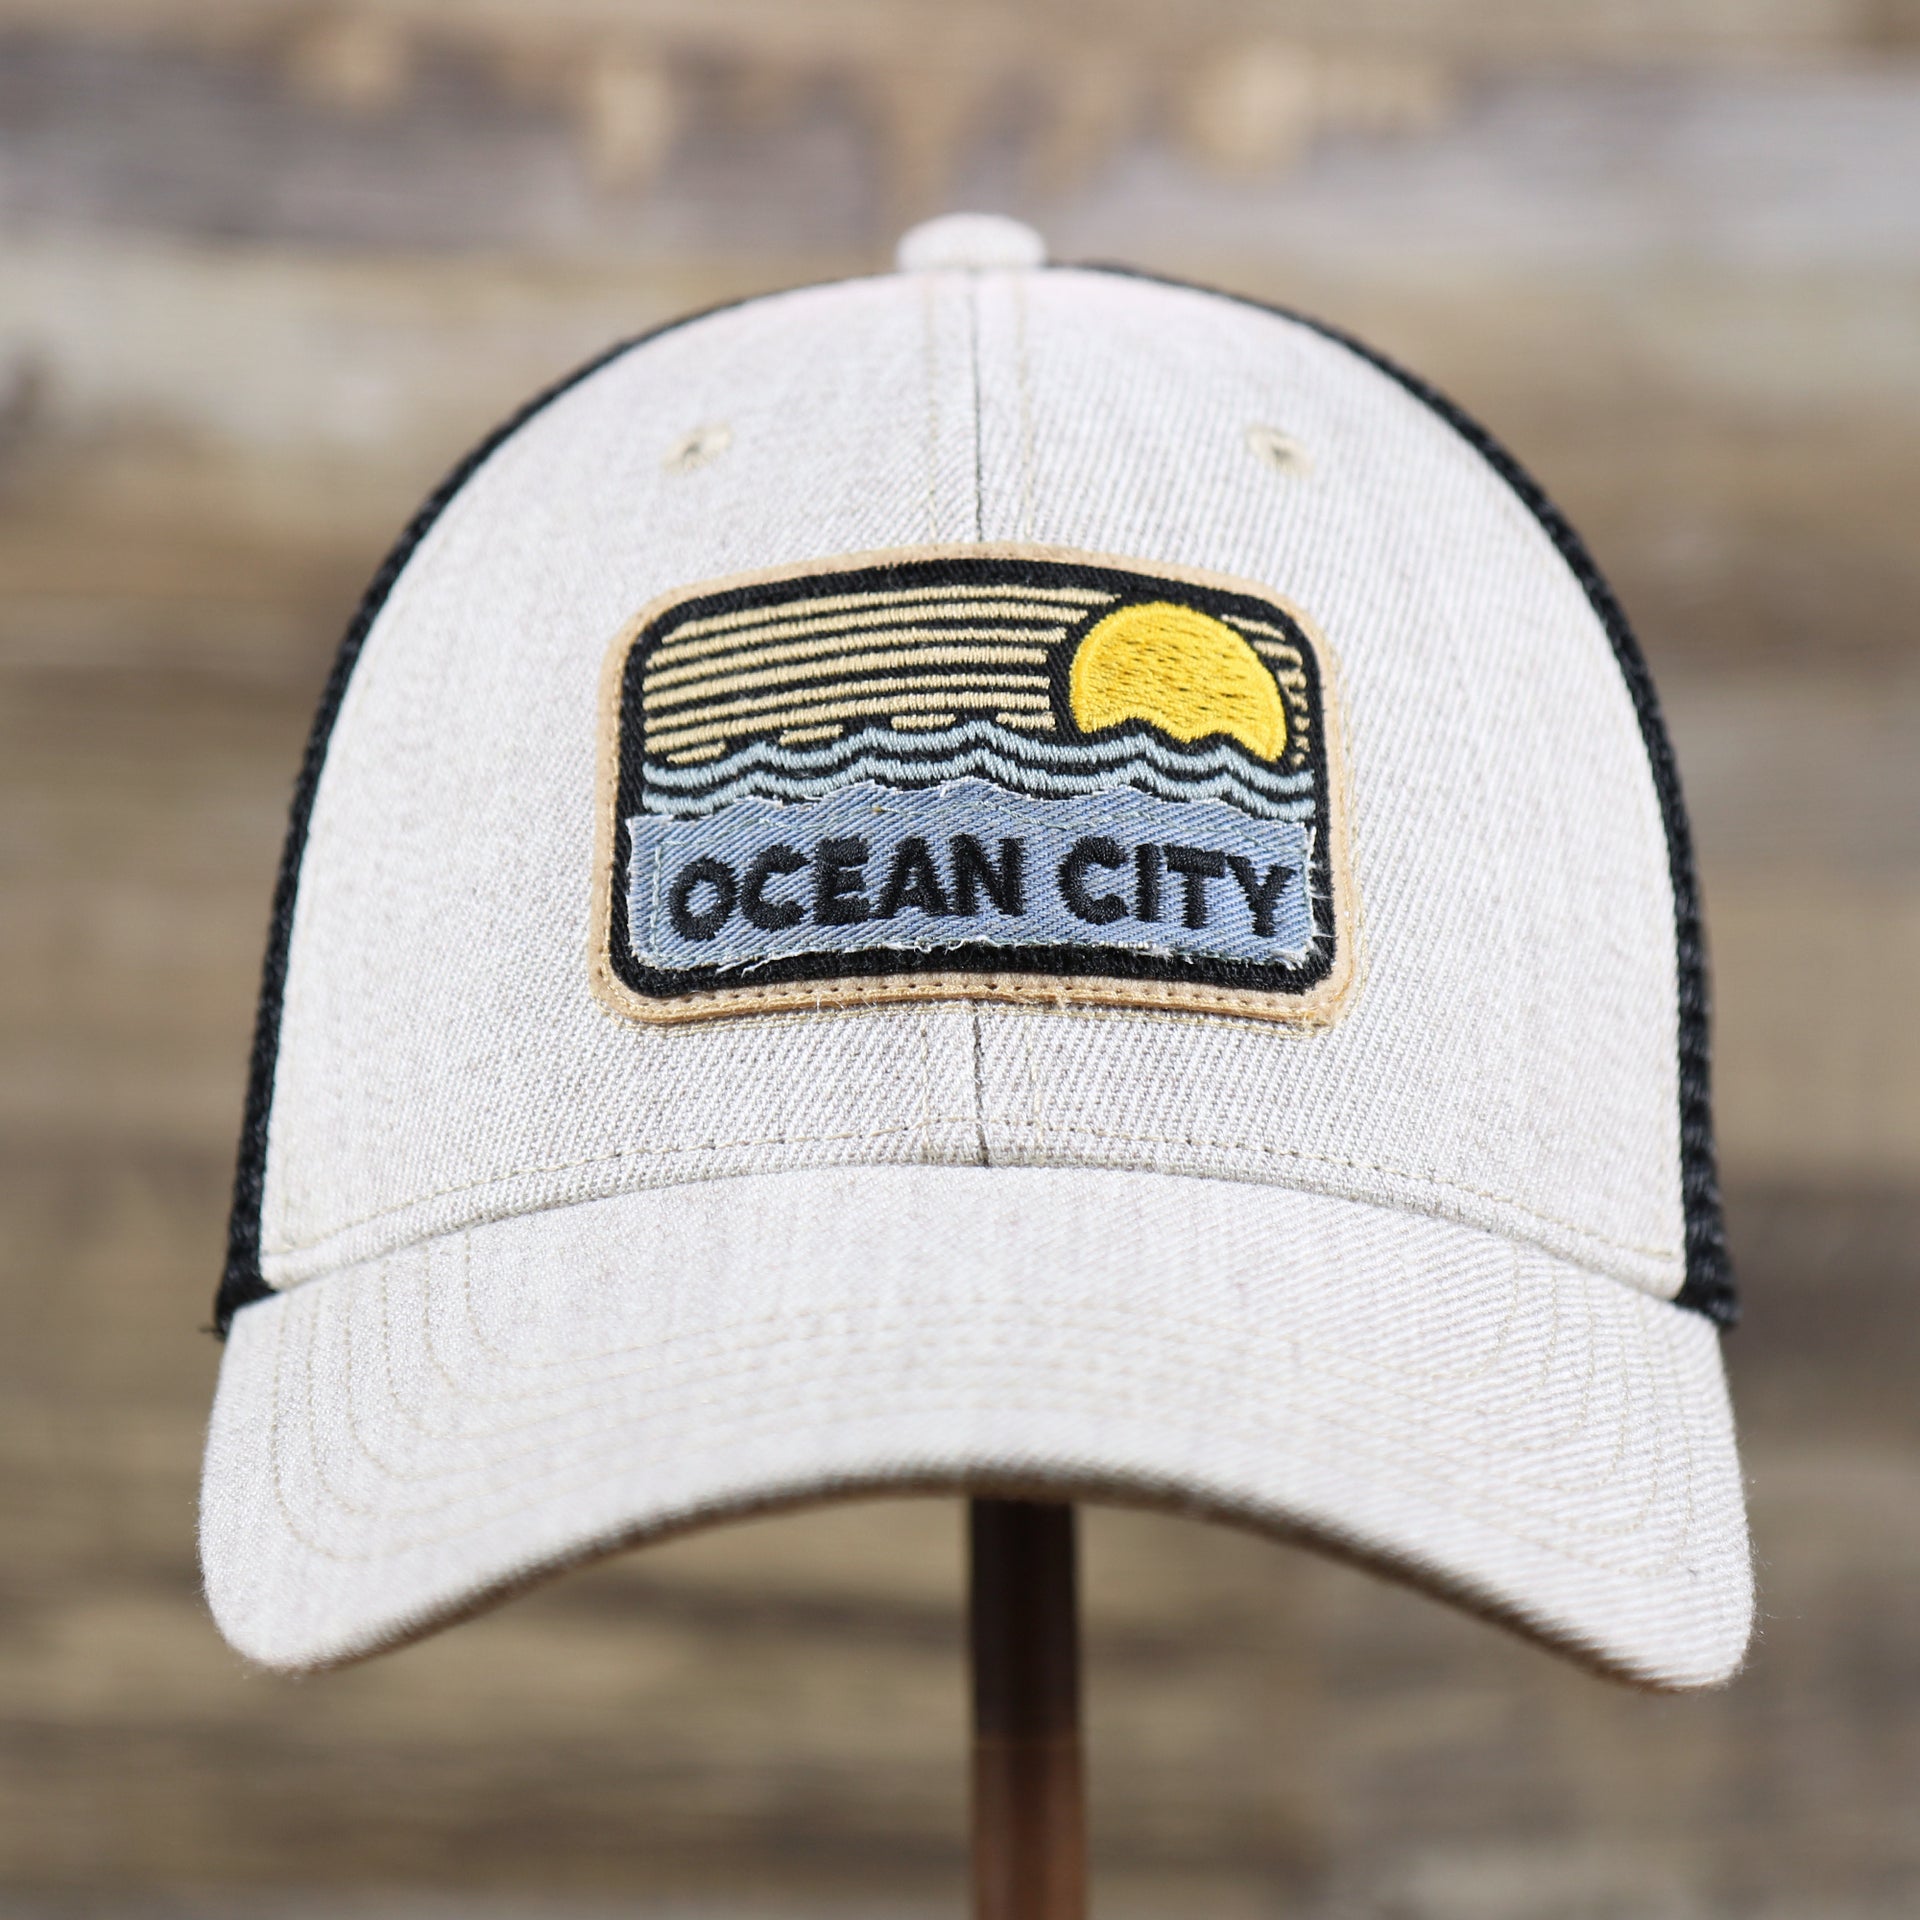 The front of the New Jersey Ocean City Sunset Mesh Back Trucker Hat | Heather Tan And Black Mesh Trucker Hat